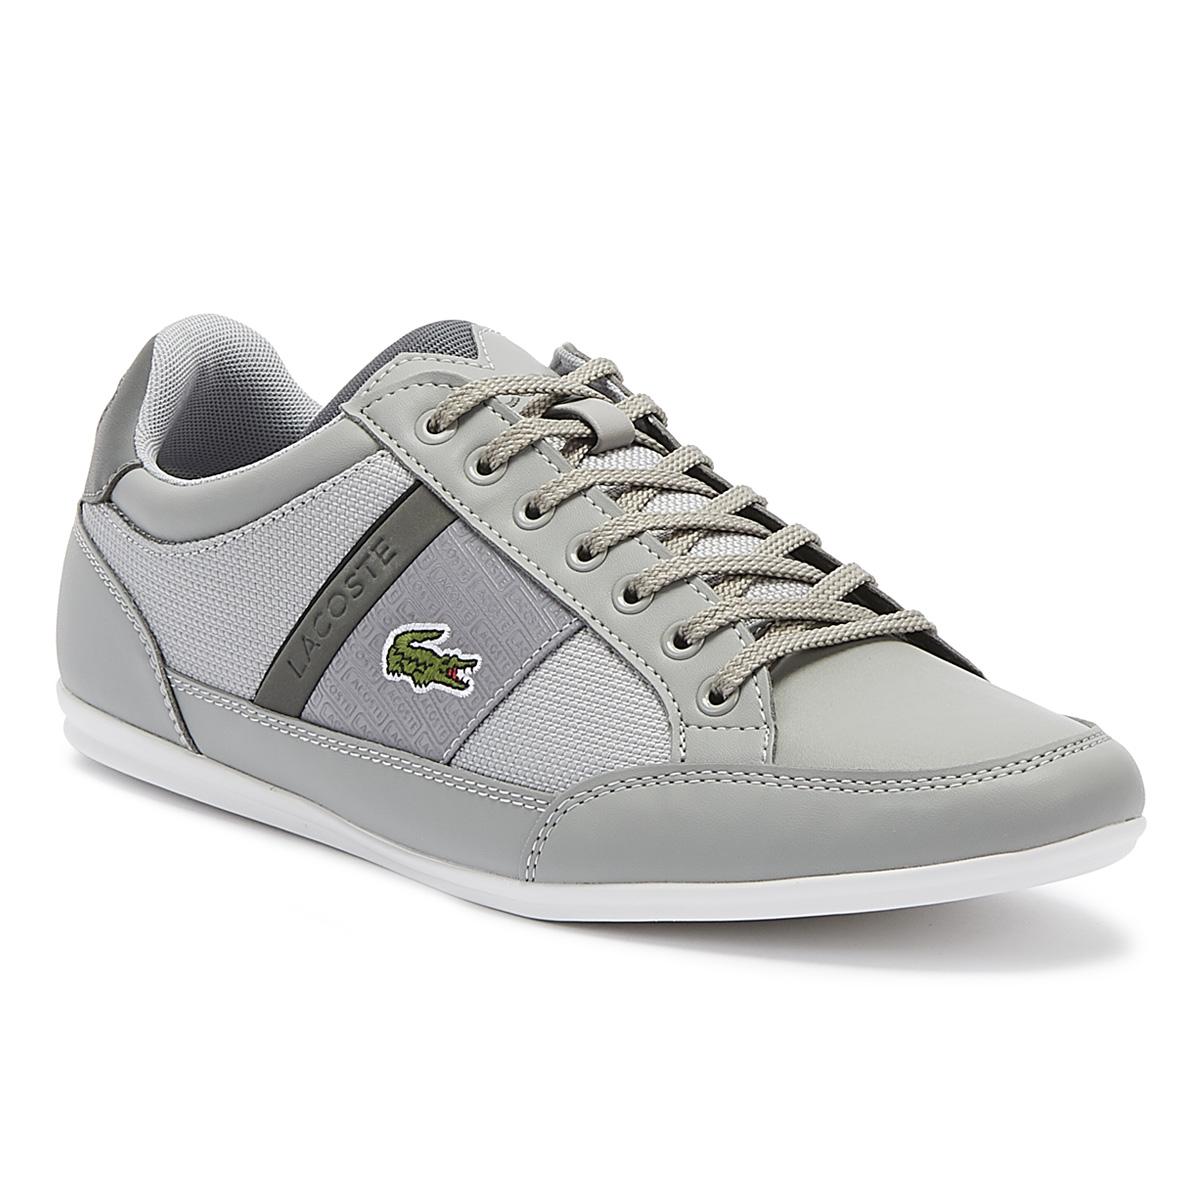 Lacoste Chaymon 319 3 Shoes (trainers) in Grey (Gray) for Men - Lyst